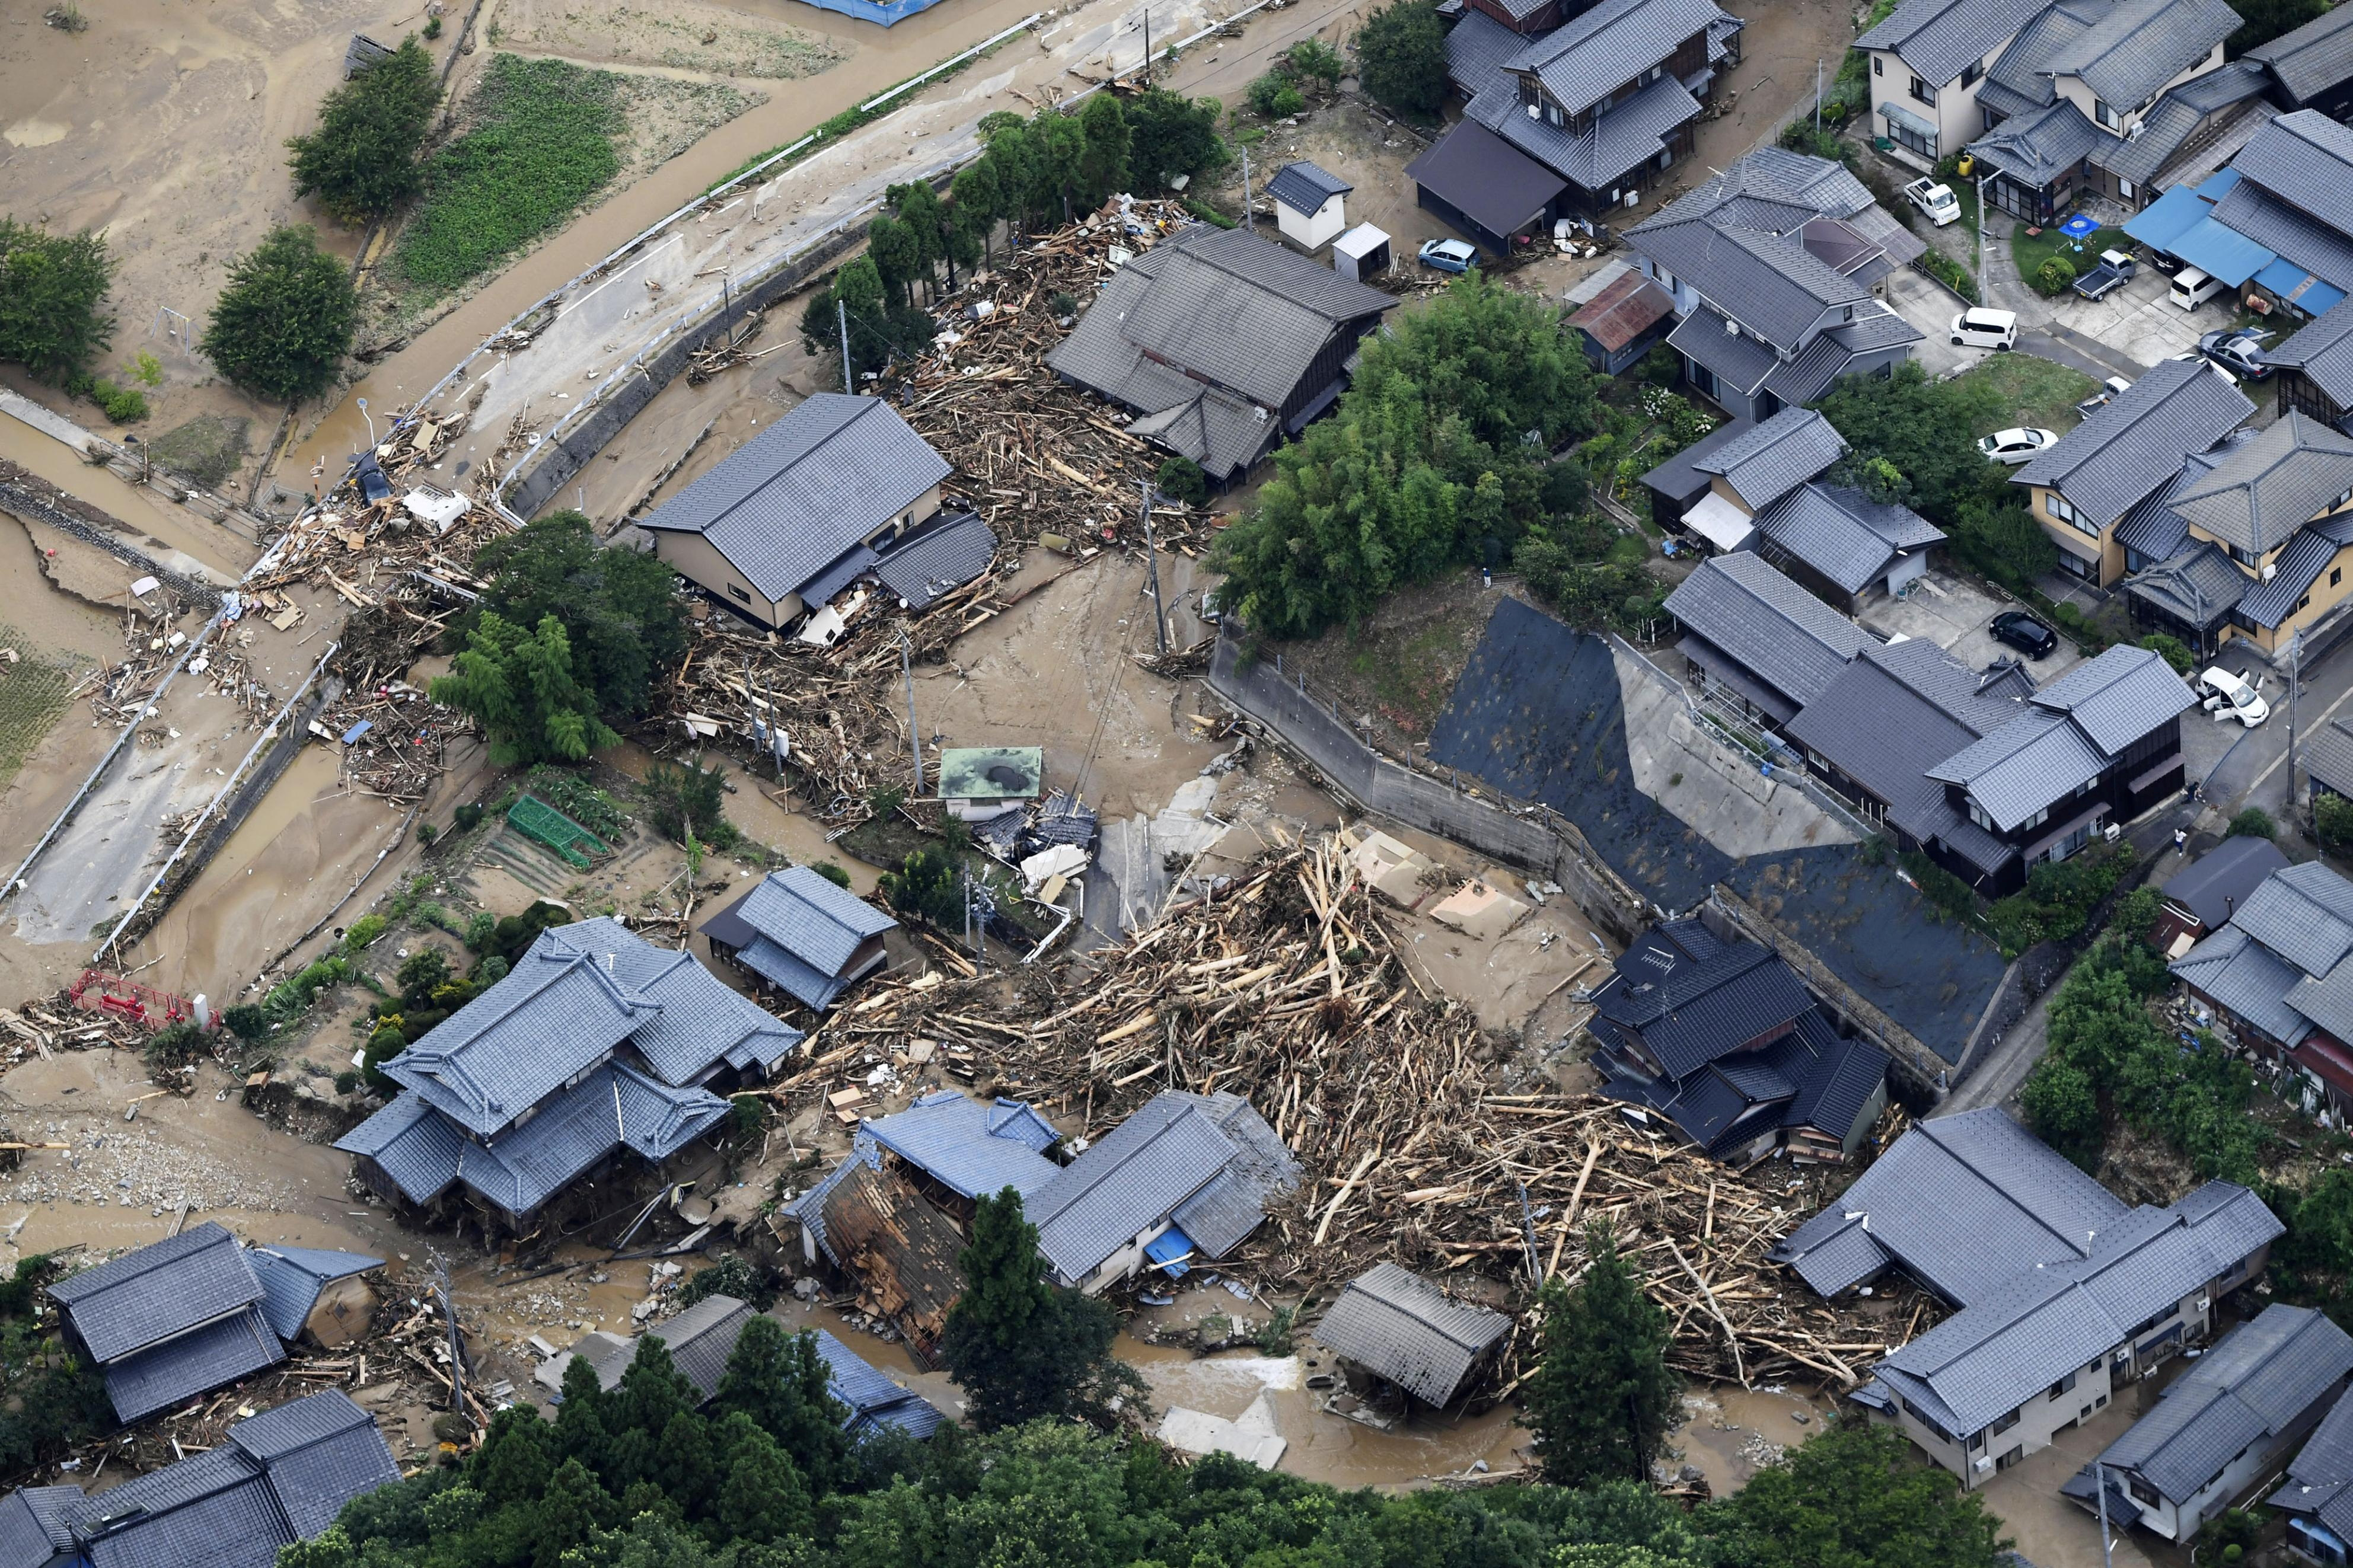 An aerial view shows debris and destroyed houses, caused by a flash flood due to heavy rains, in Murakami, Niigata prefecture